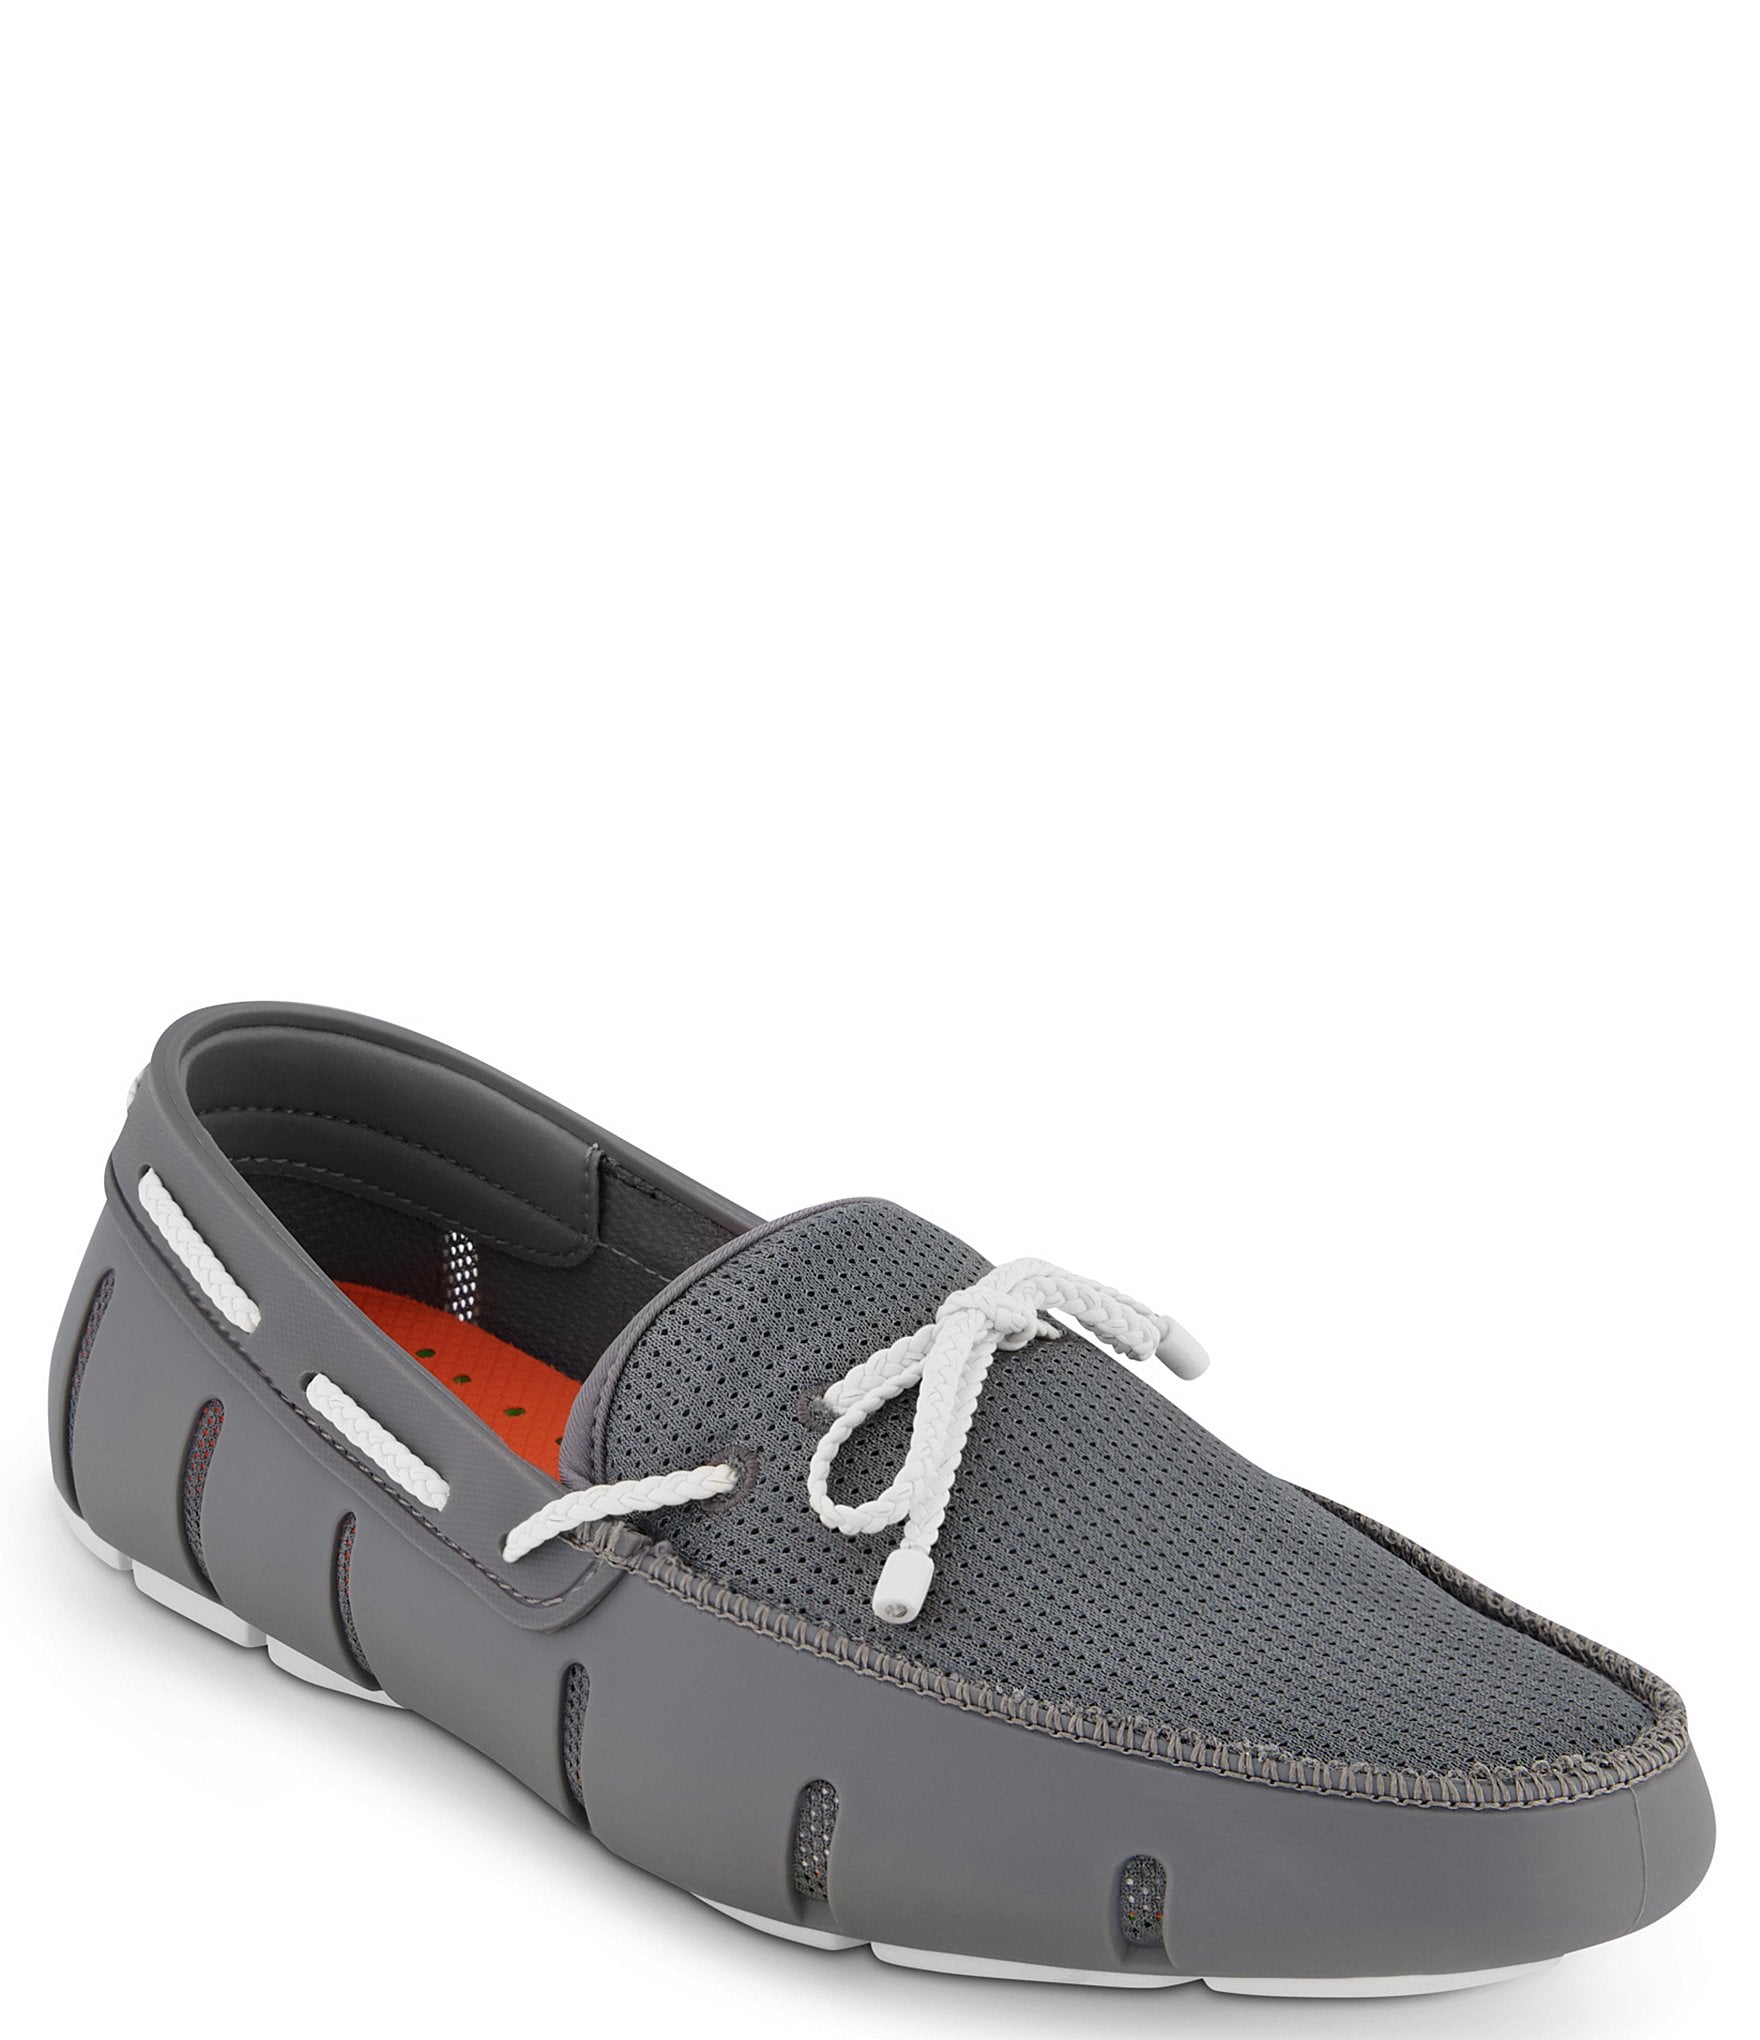 https://dimg.dillards.com/is/image/DillardsZoom/zoom/swims-mens-braided-lace-lux-washable-loafer-drivers/00000000_zi_4538a3d1-8b21-4aac-a7f5-ad35a8eb688d.jpg